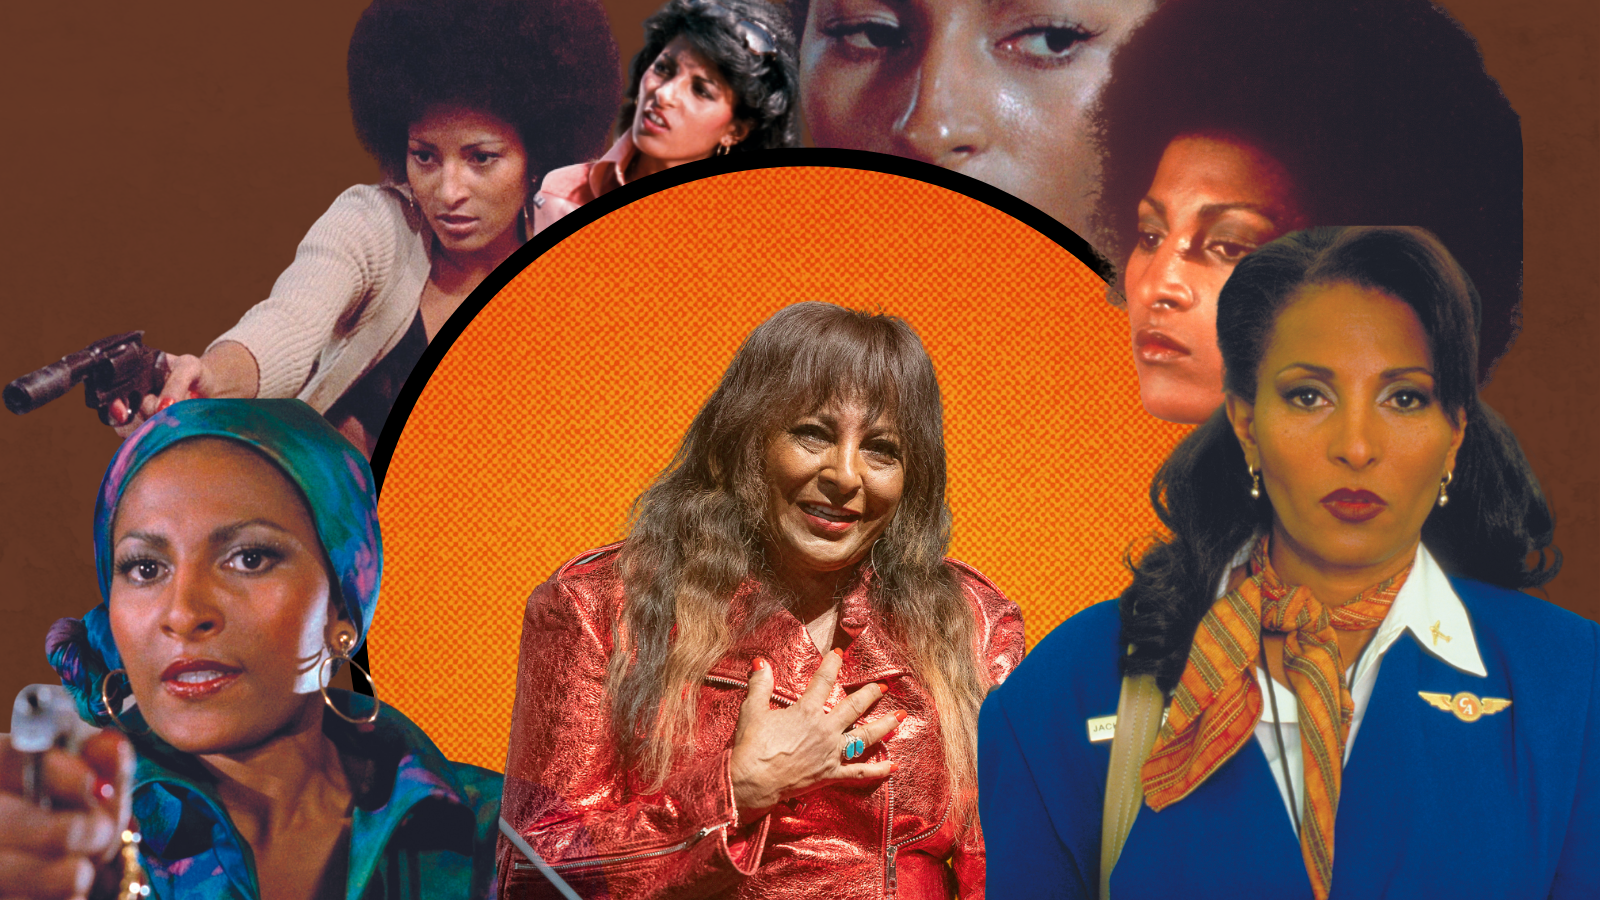 Pam Grier on grit, becoming an action woman and taking back power